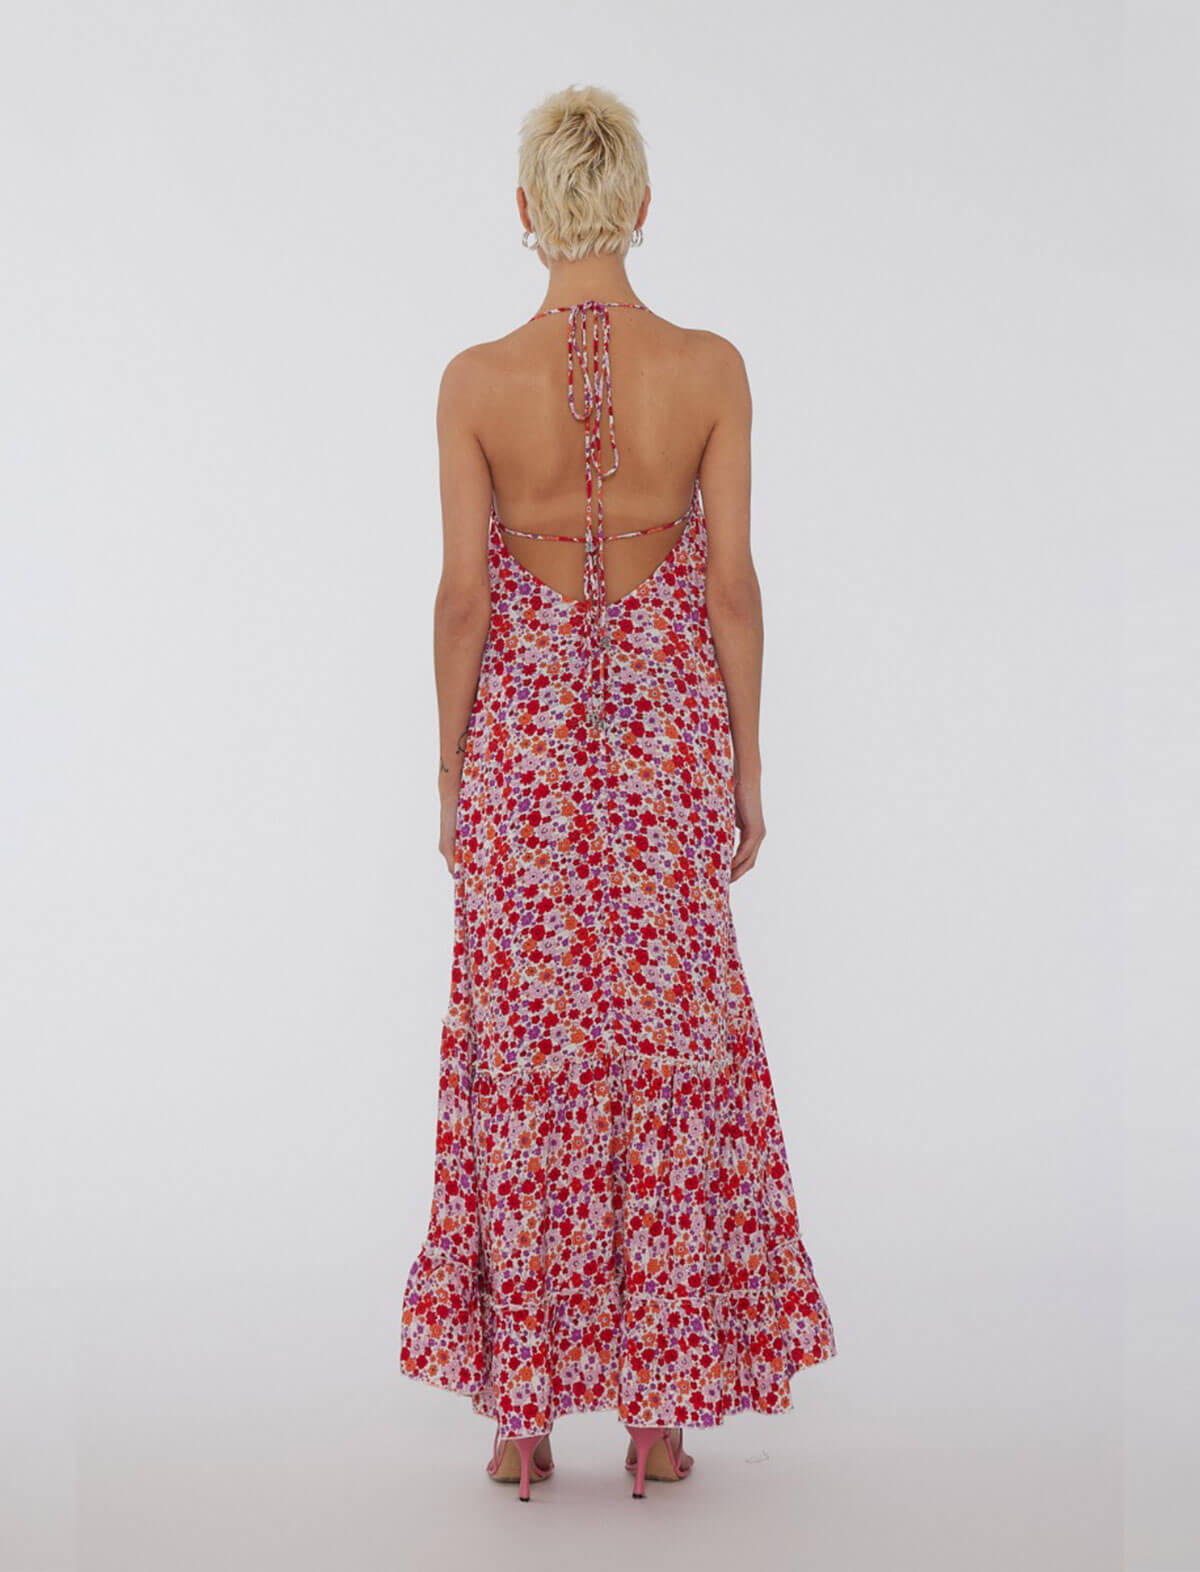 ROTATE SUNDAY 6 Jacquard Maxi Dress in Red Floral Print